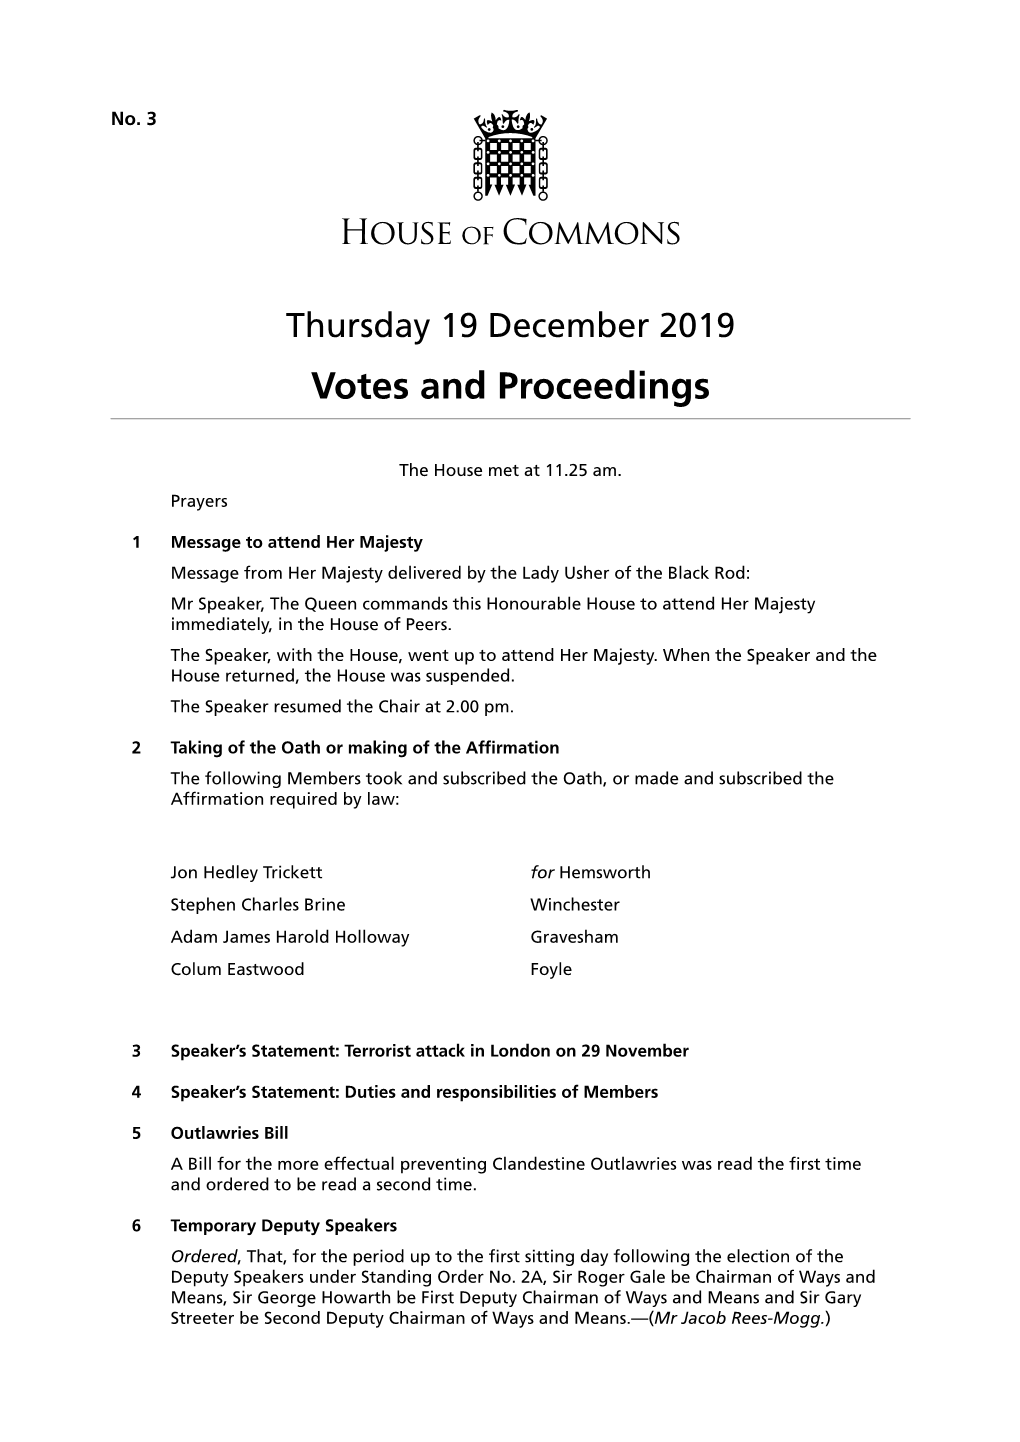 Votes and Proceedings for 19 Dec 2019